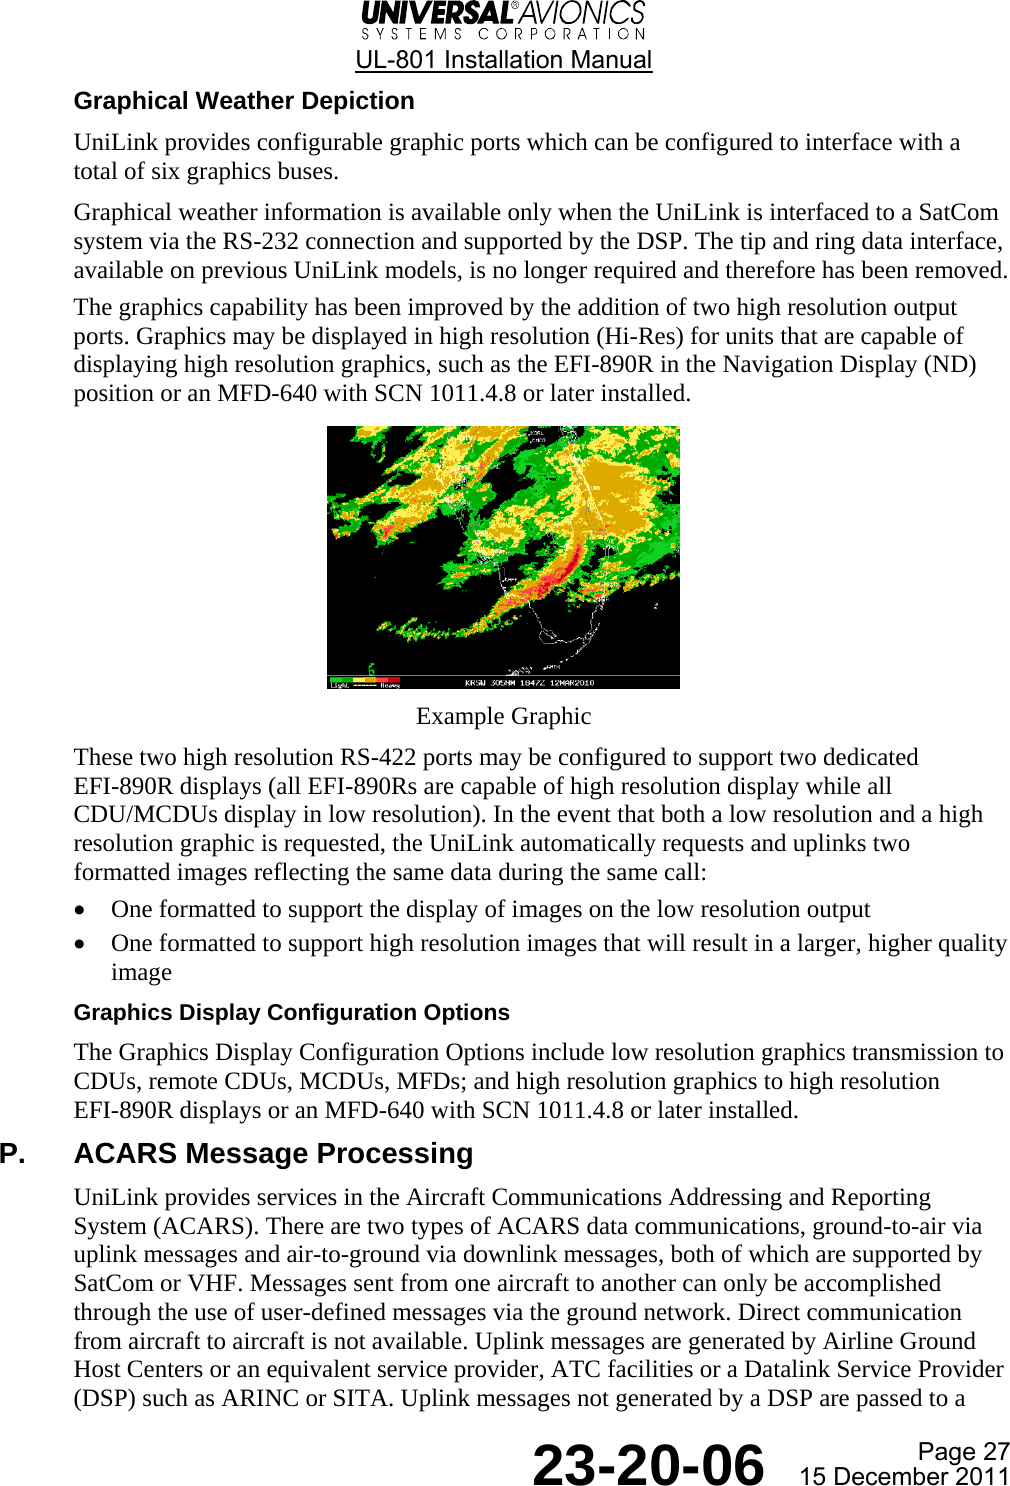  UL-801 Installation Manual  Page 27  23-20-06  15 December 2011 Graphical Weather Depiction UniLink provides configurable graphic ports which can be configured to interface with a total of six graphics buses. Graphical weather information is available only when the UniLink is interfaced to a SatCom system via the RS-232 connection and supported by the DSP. The tip and ring data interface, available on previous UniLink models, is no longer required and therefore has been removed. The graphics capability has been improved by the addition of two high resolution output ports. Graphics may be displayed in high resolution (Hi-Res) for units that are capable of displaying high resolution graphics, such as the EFI-890R in the Navigation Display (ND) position or an MFD-640 with SCN 1011.4.8 or later installed.  Example Graphic These two high resolution RS-422 ports may be configured to support two dedicated EFI-890R displays (all EFI-890Rs are capable of high resolution display while all CDU/MCDUs display in low resolution). In the event that both a low resolution and a high resolution graphic is requested, the UniLink automatically requests and uplinks two formatted images reflecting the same data during the same call: • One formatted to support the display of images on the low resolution output • One formatted to support high resolution images that will result in a larger, higher quality image Graphics Display Configuration Options The Graphics Display Configuration Options include low resolution graphics transmission to CDUs, remote CDUs, MCDUs, MFDs; and high resolution graphics to high resolution EFI-890R displays or an MFD-640 with SCN 1011.4.8 or later installed. P.  ACARS Message Processing UniLink provides services in the Aircraft Communications Addressing and Reporting System (ACARS). There are two types of ACARS data communications, ground-to-air via uplink messages and air-to-ground via downlink messages, both of which are supported by SatCom or VHF. Messages sent from one aircraft to another can only be accomplished through the use of user-defined messages via the ground network. Direct communication from aircraft to aircraft is not available. Uplink messages are generated by Airline Ground Host Centers or an equivalent service provider, ATC facilities or a Datalink Service Provider (DSP) such as ARINC or SITA. Uplink messages not generated by a DSP are passed to a 